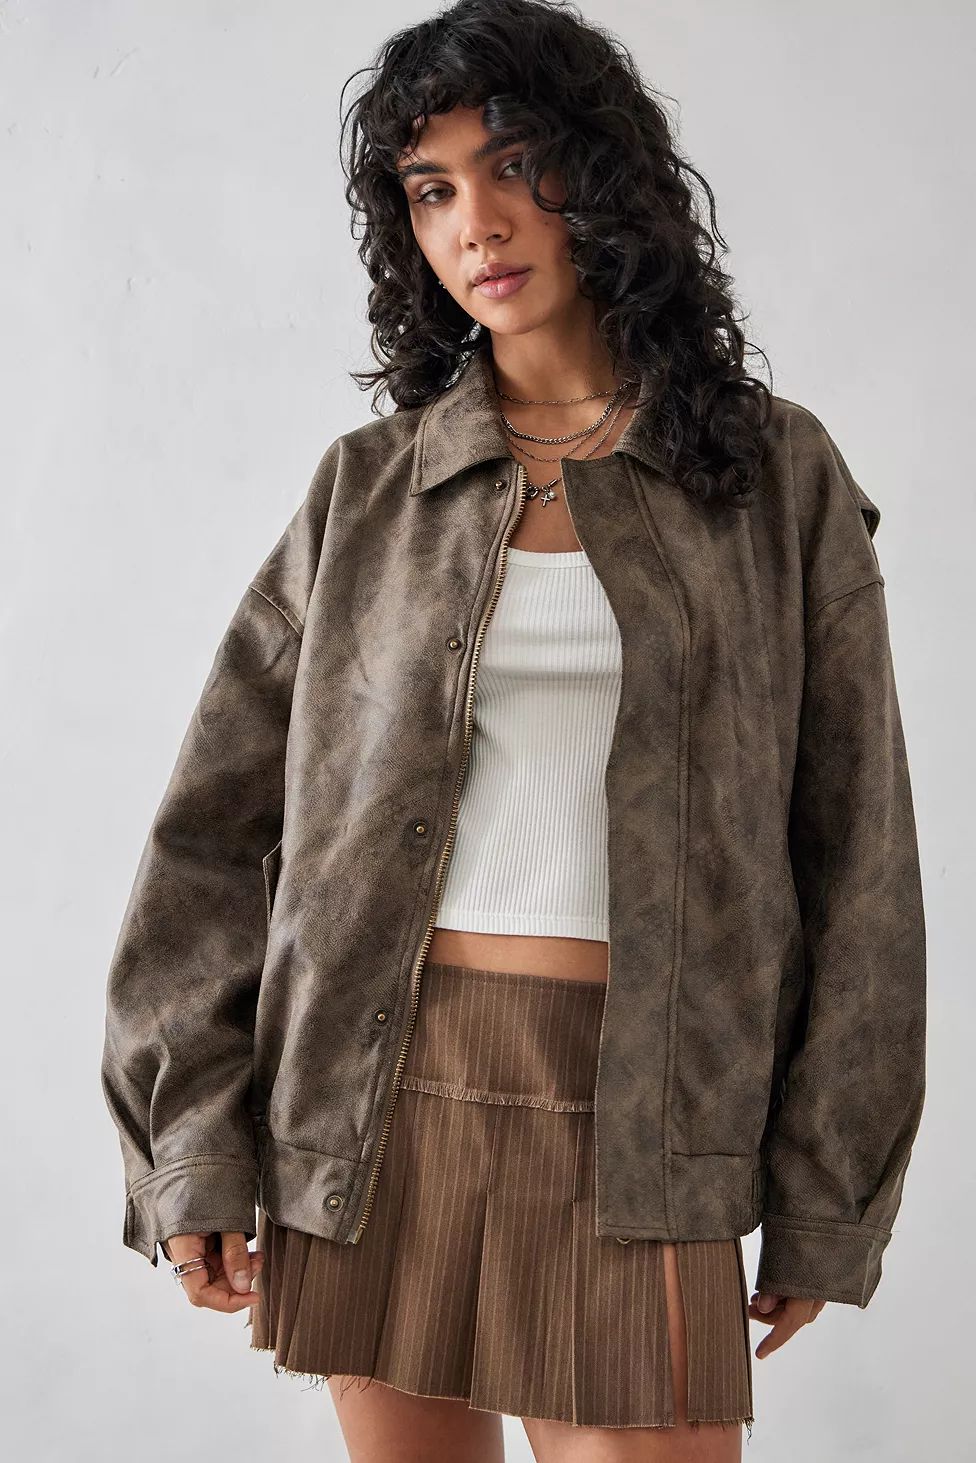 Lioness Kenny Chocolate Bomber Jacket | Urban Outfitters (EU)